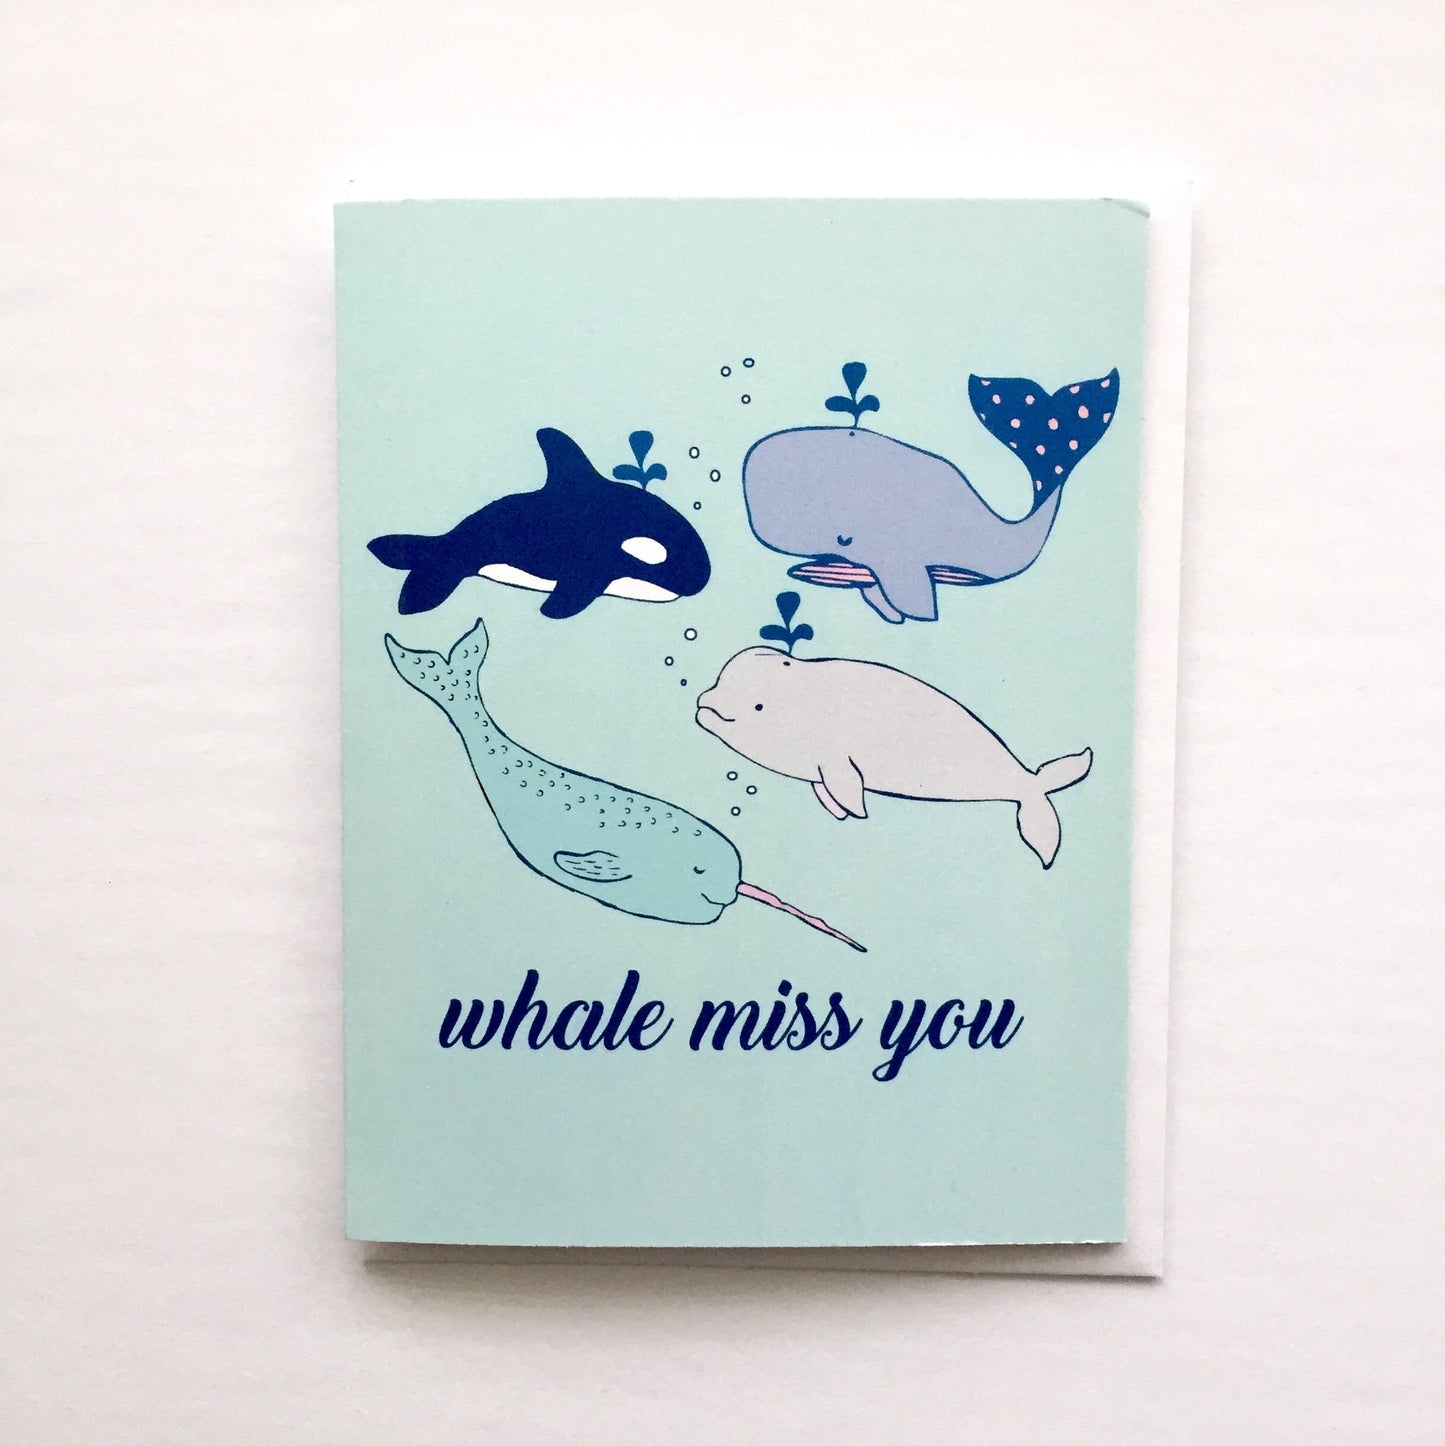 Whale Miss You Card - Punny Whale Card, Whales Print, Whale Art, Orca and Beluga Whales